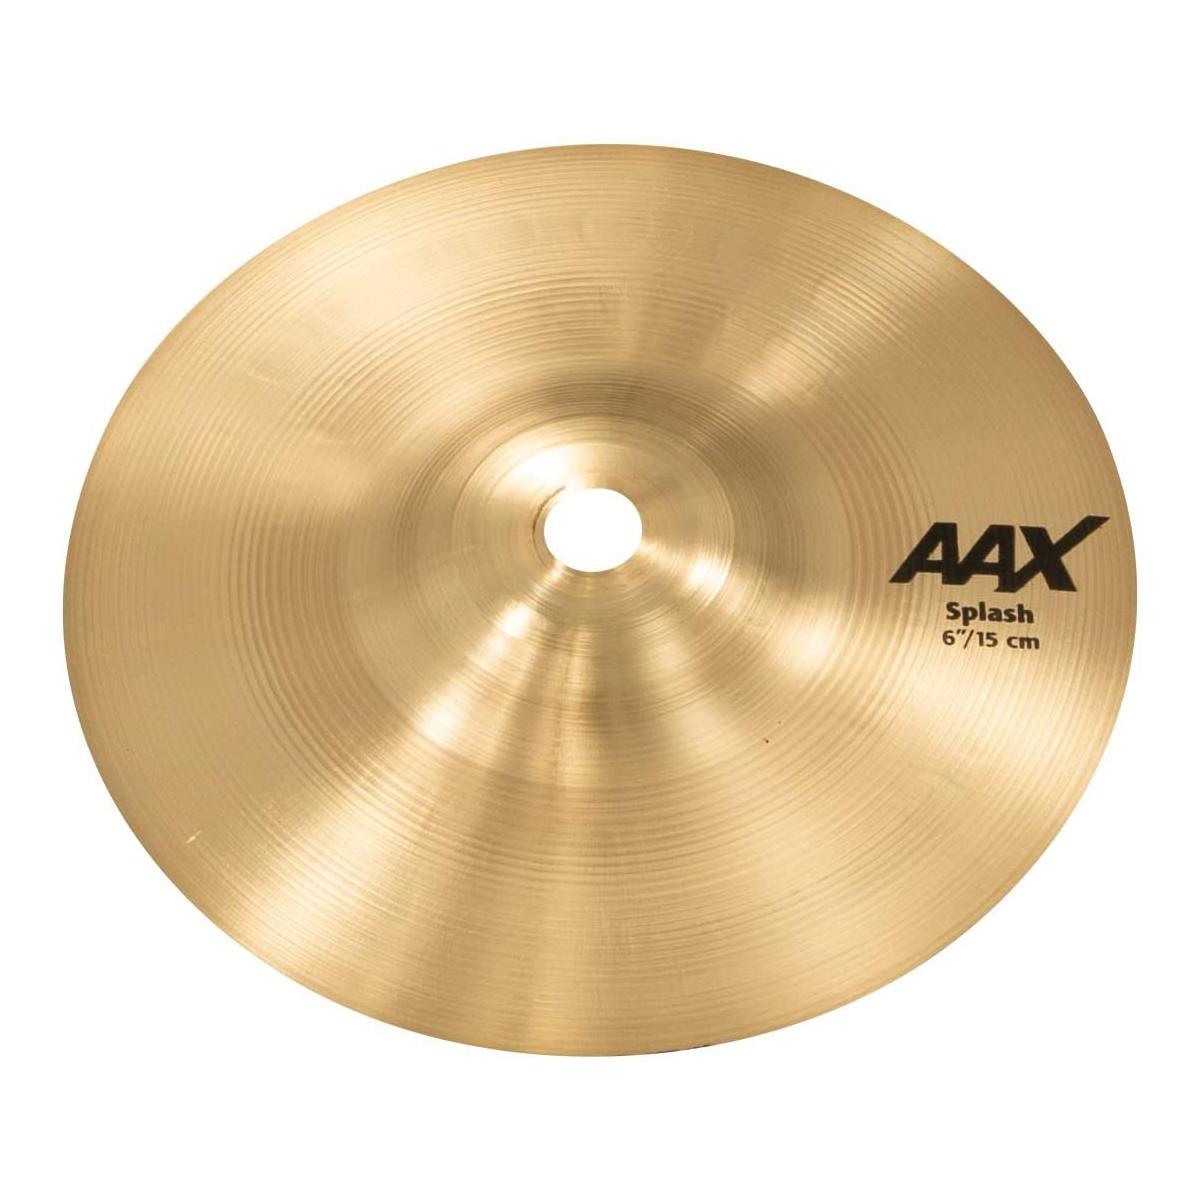 Sabian 6" AAX Splash Cymbal, Extra-Thin, Natural Finish Extremely fast and very bright, the SABIAN 6" AAX Splash provides plenty of penetrating cut. The SABIAN AAX series delivers consistently bright, crisp, clear and cutting responses - AAX is the ultimate Modern Bright sound!